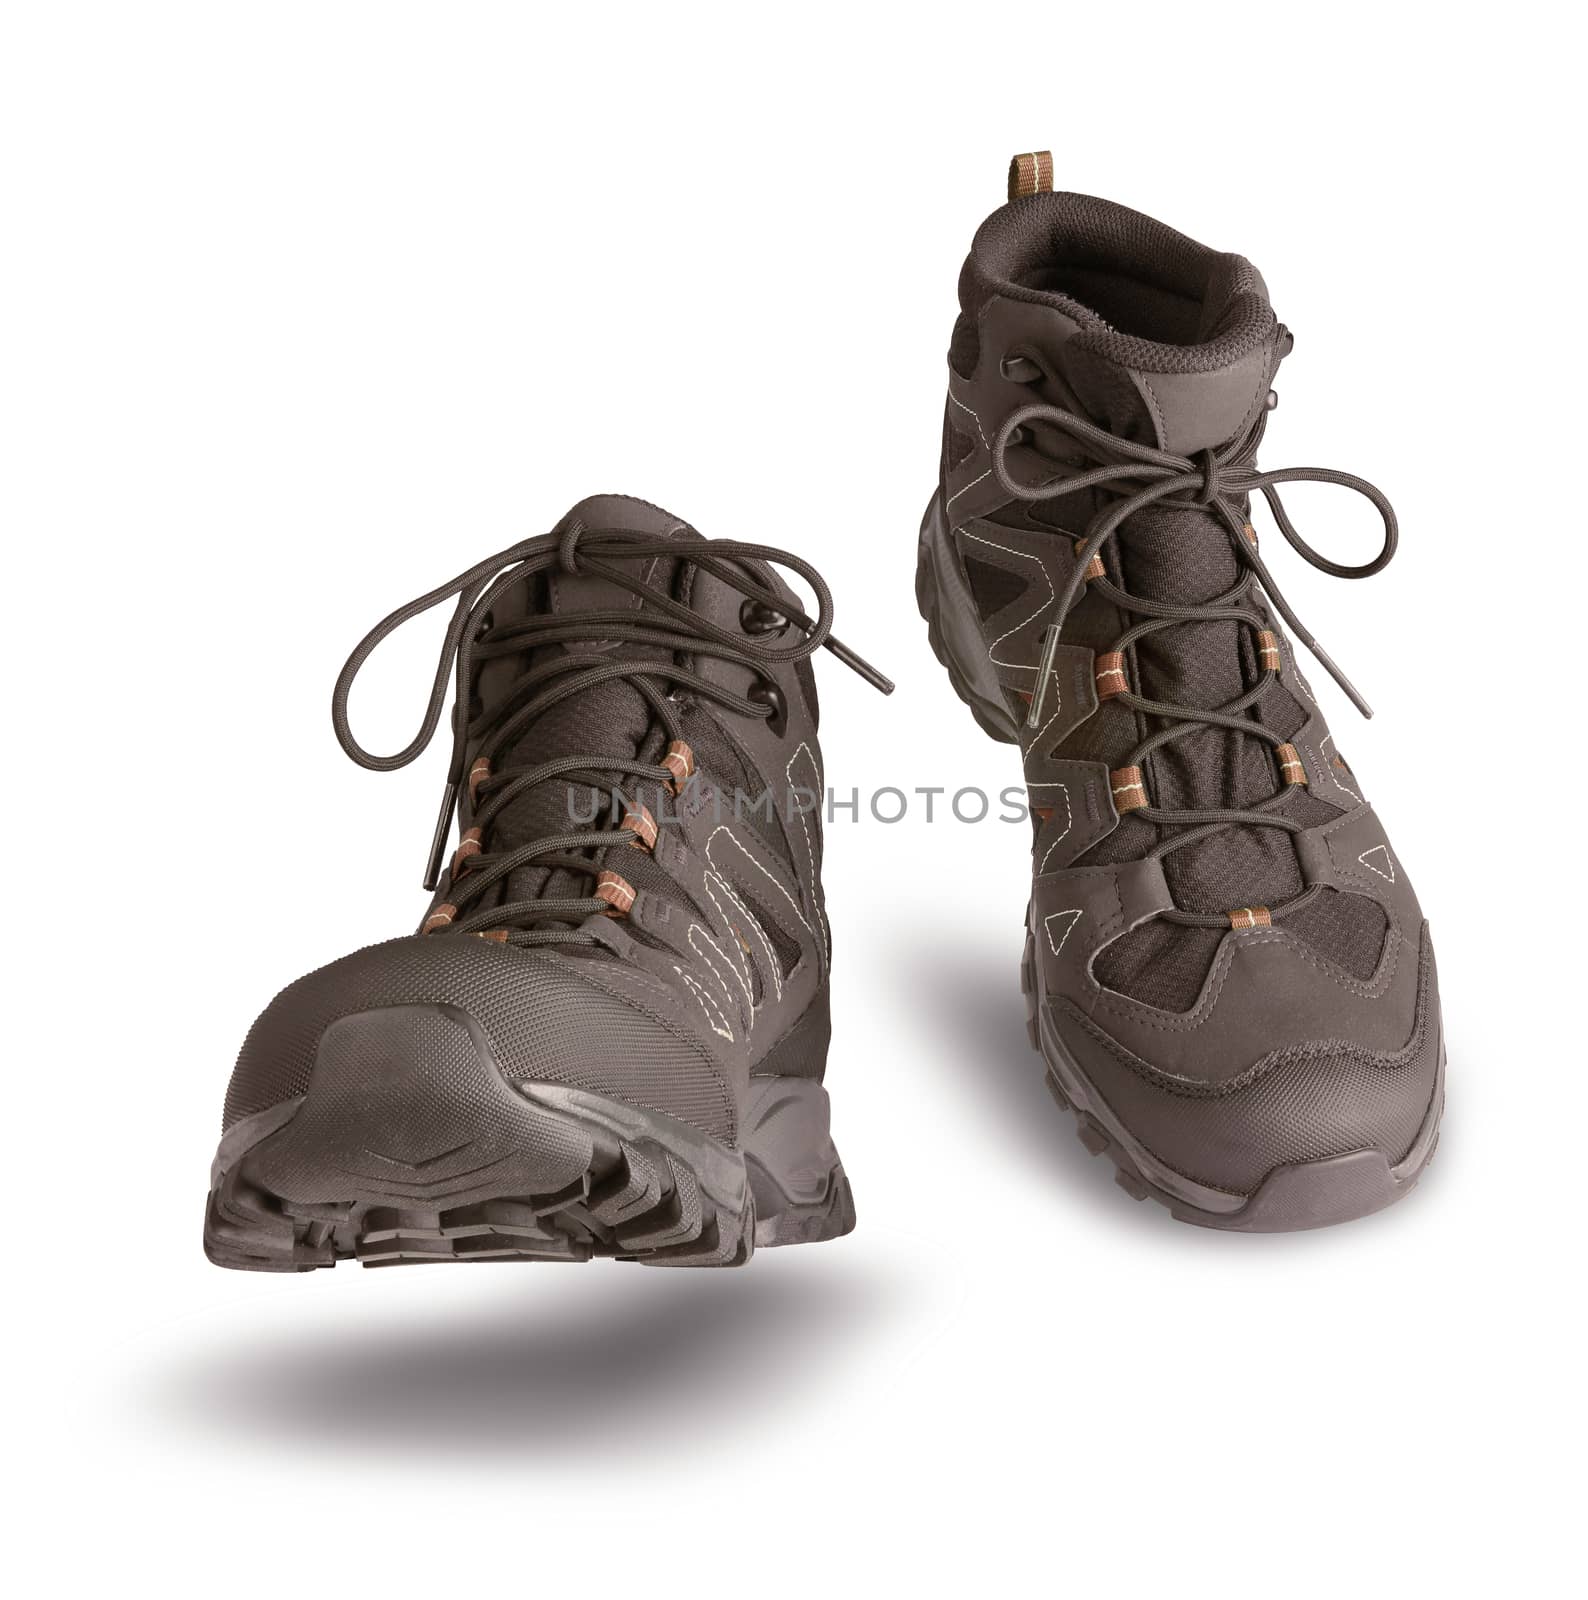 Hiking boots walking on white background, outdoor trekking activity concept